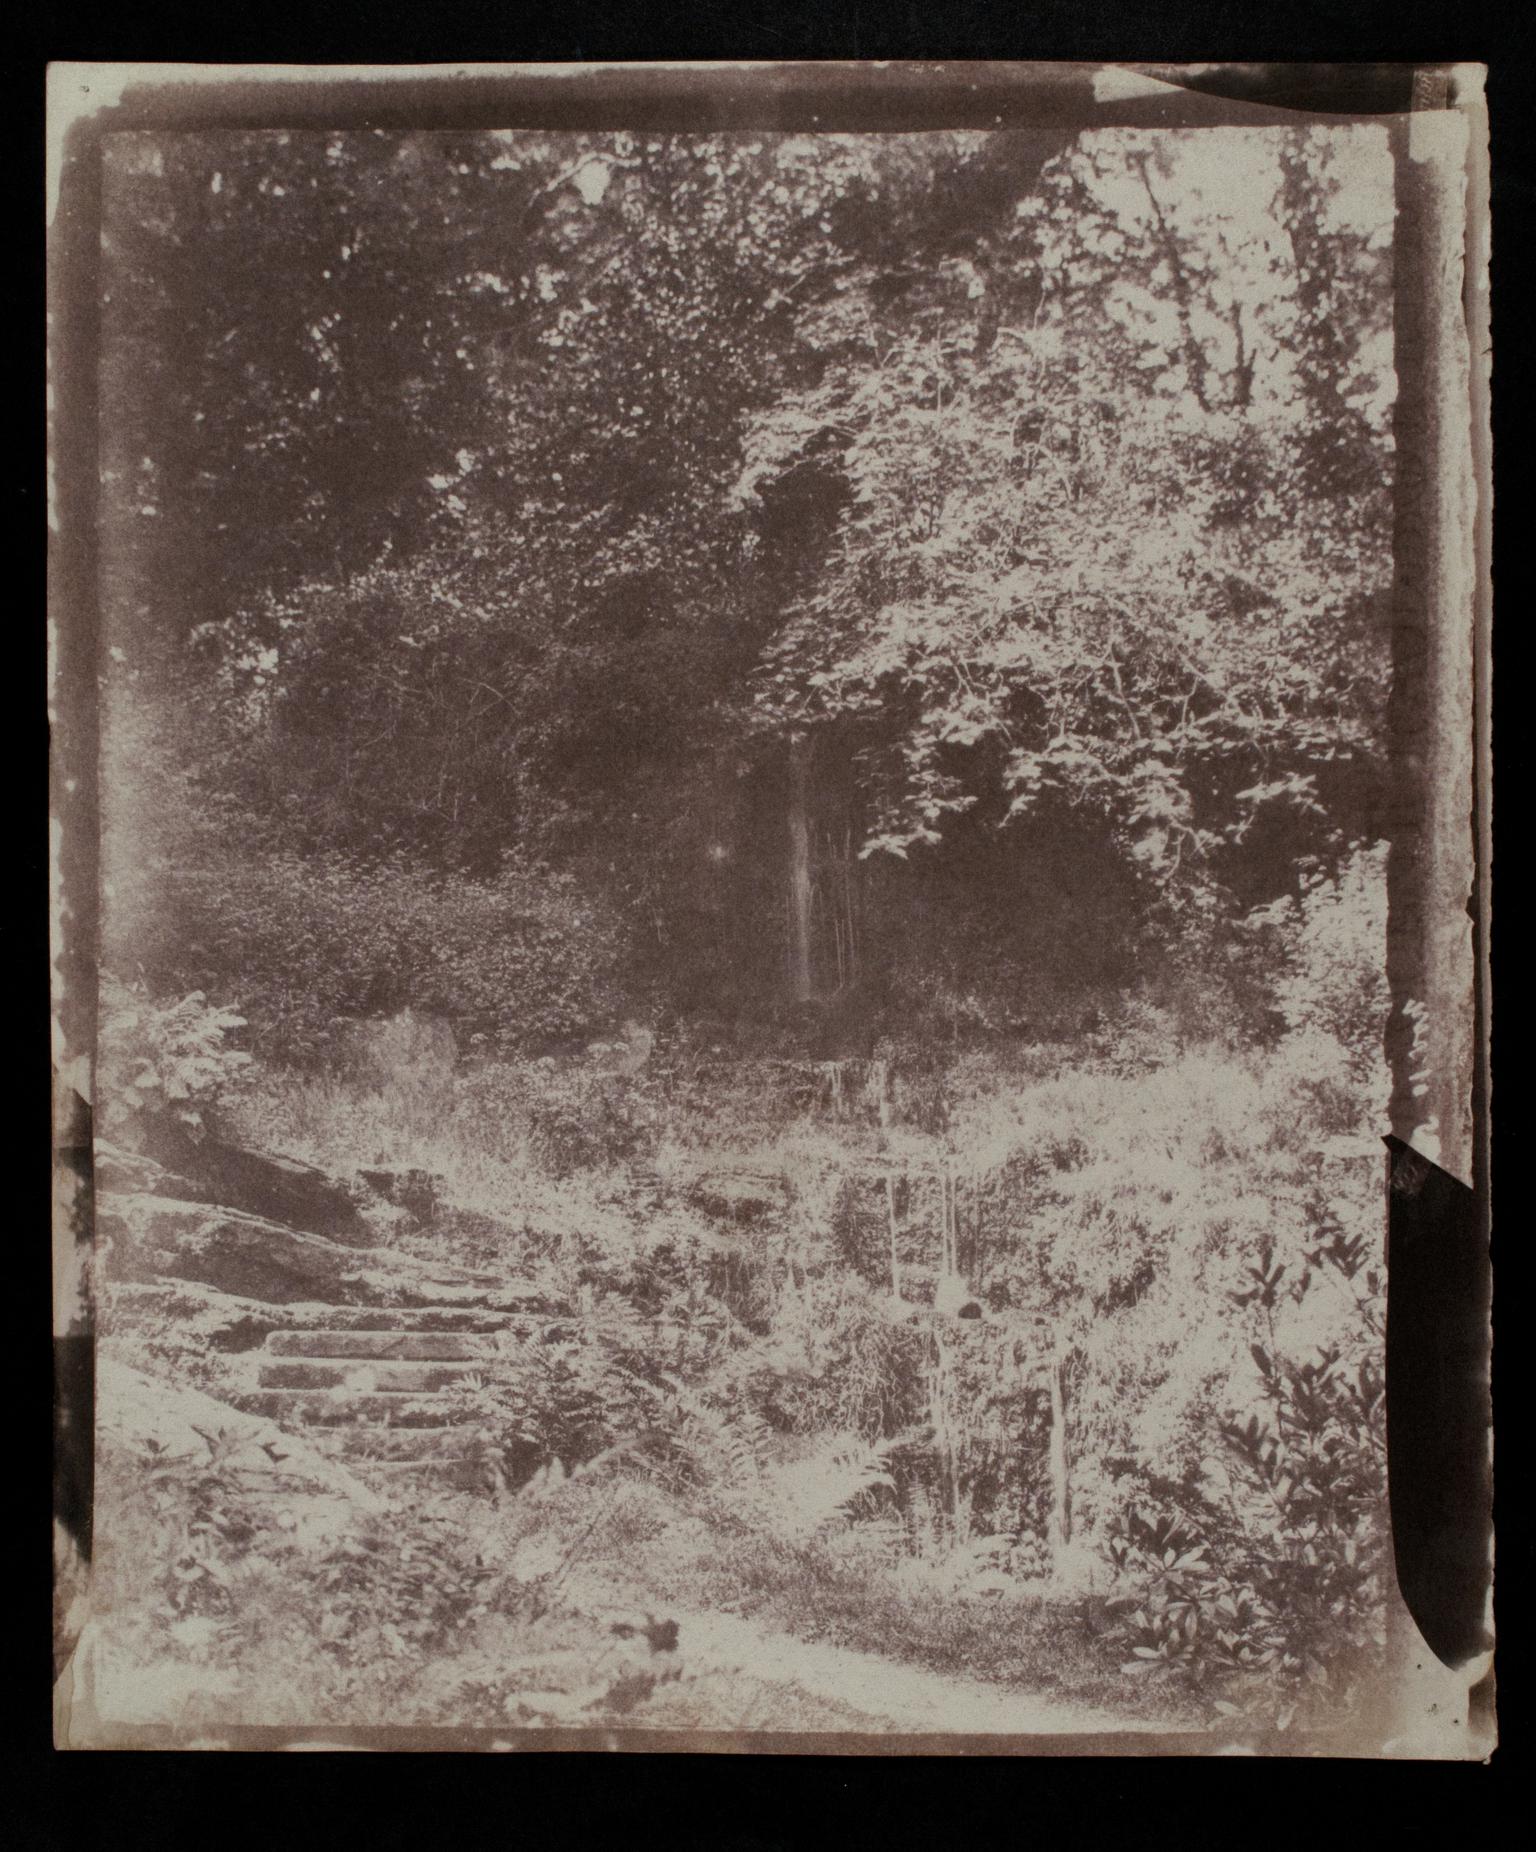 Penllergare, steps in valley, photograph